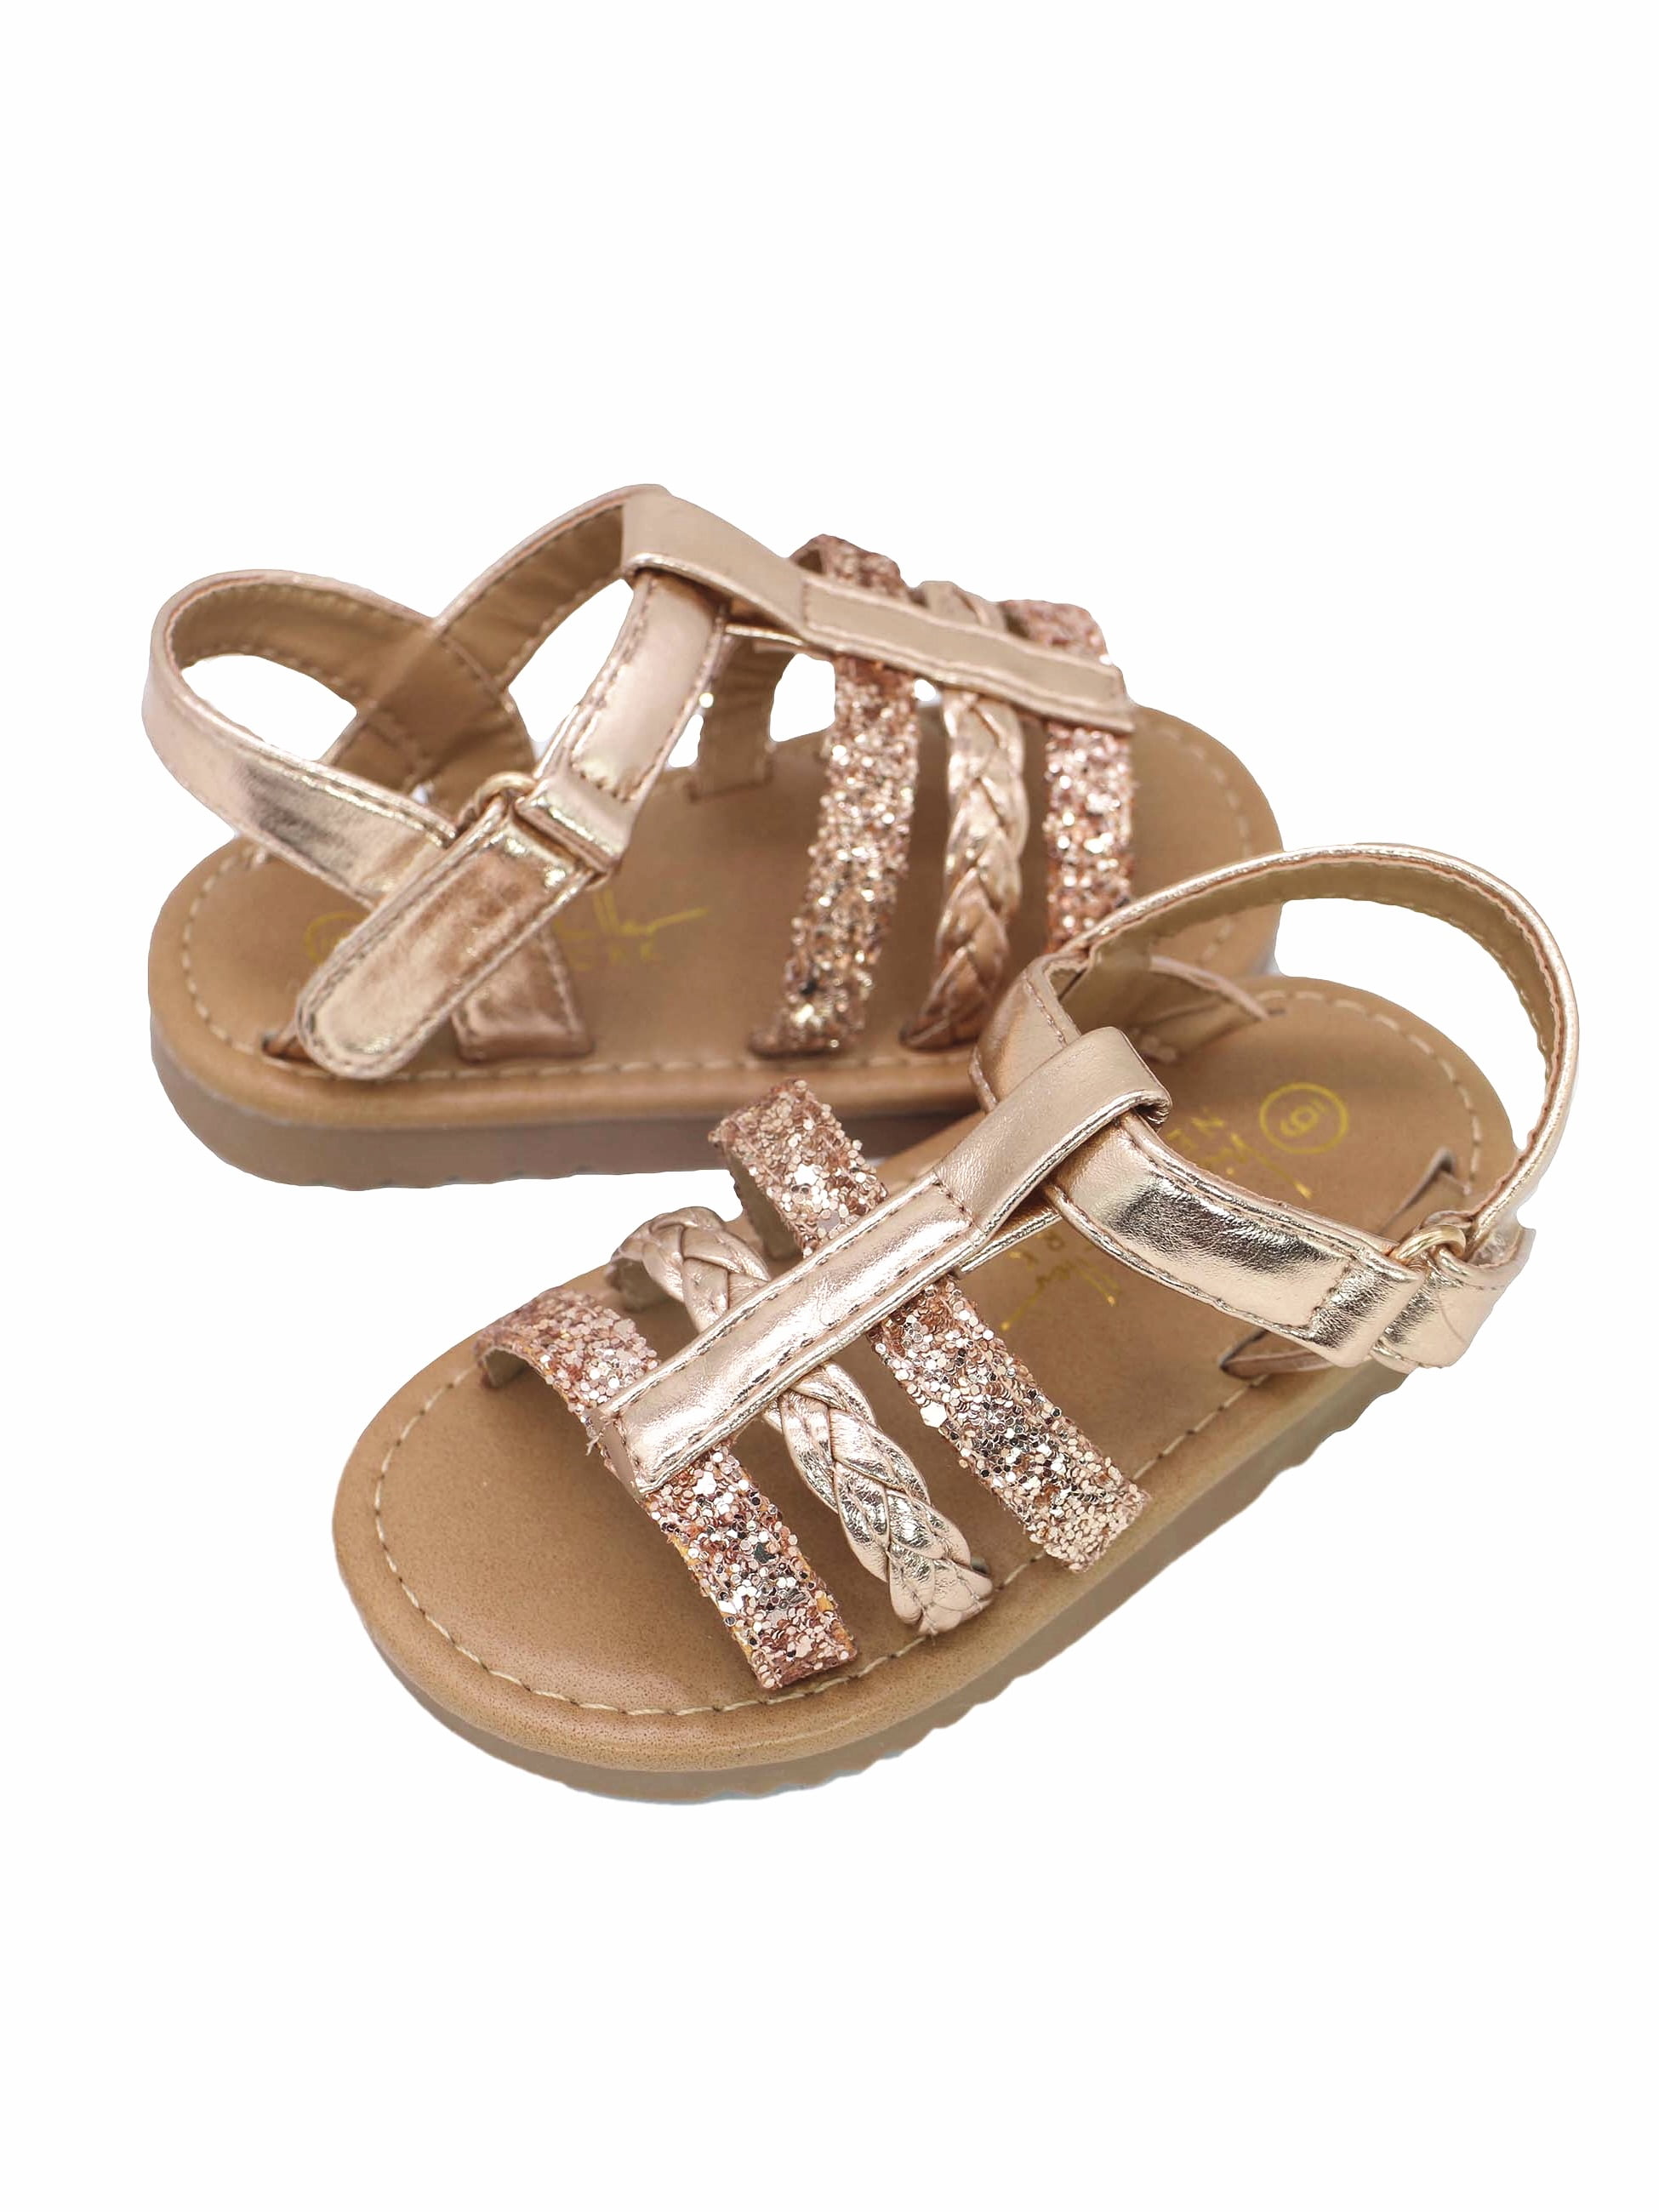 sandals with tags size 10 baby gap toddler girl's brand new golden  shoes 